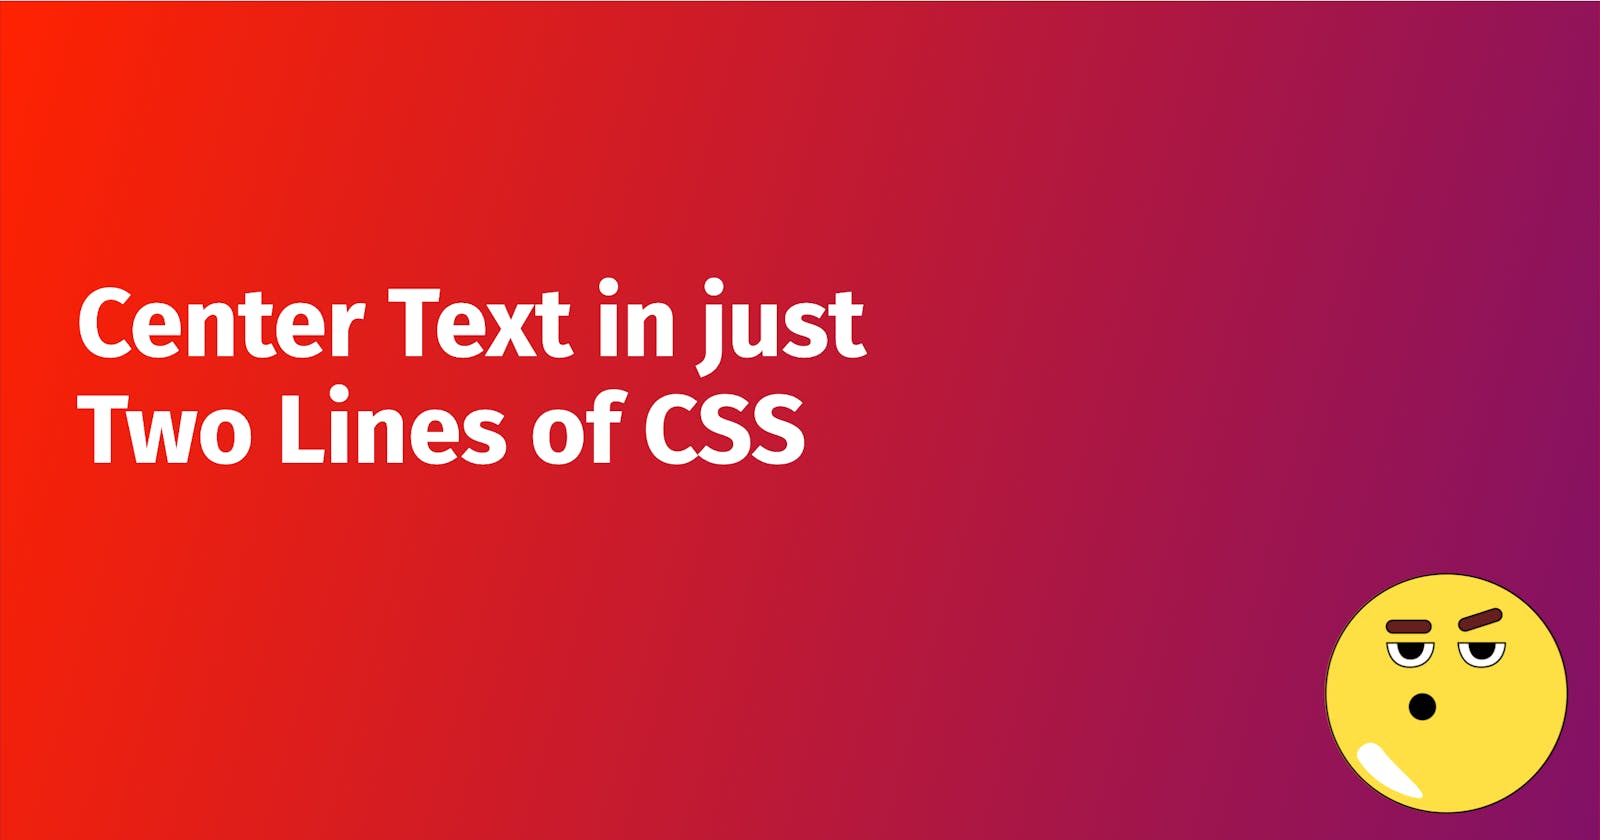 Center Text in just Two Lines of CSS